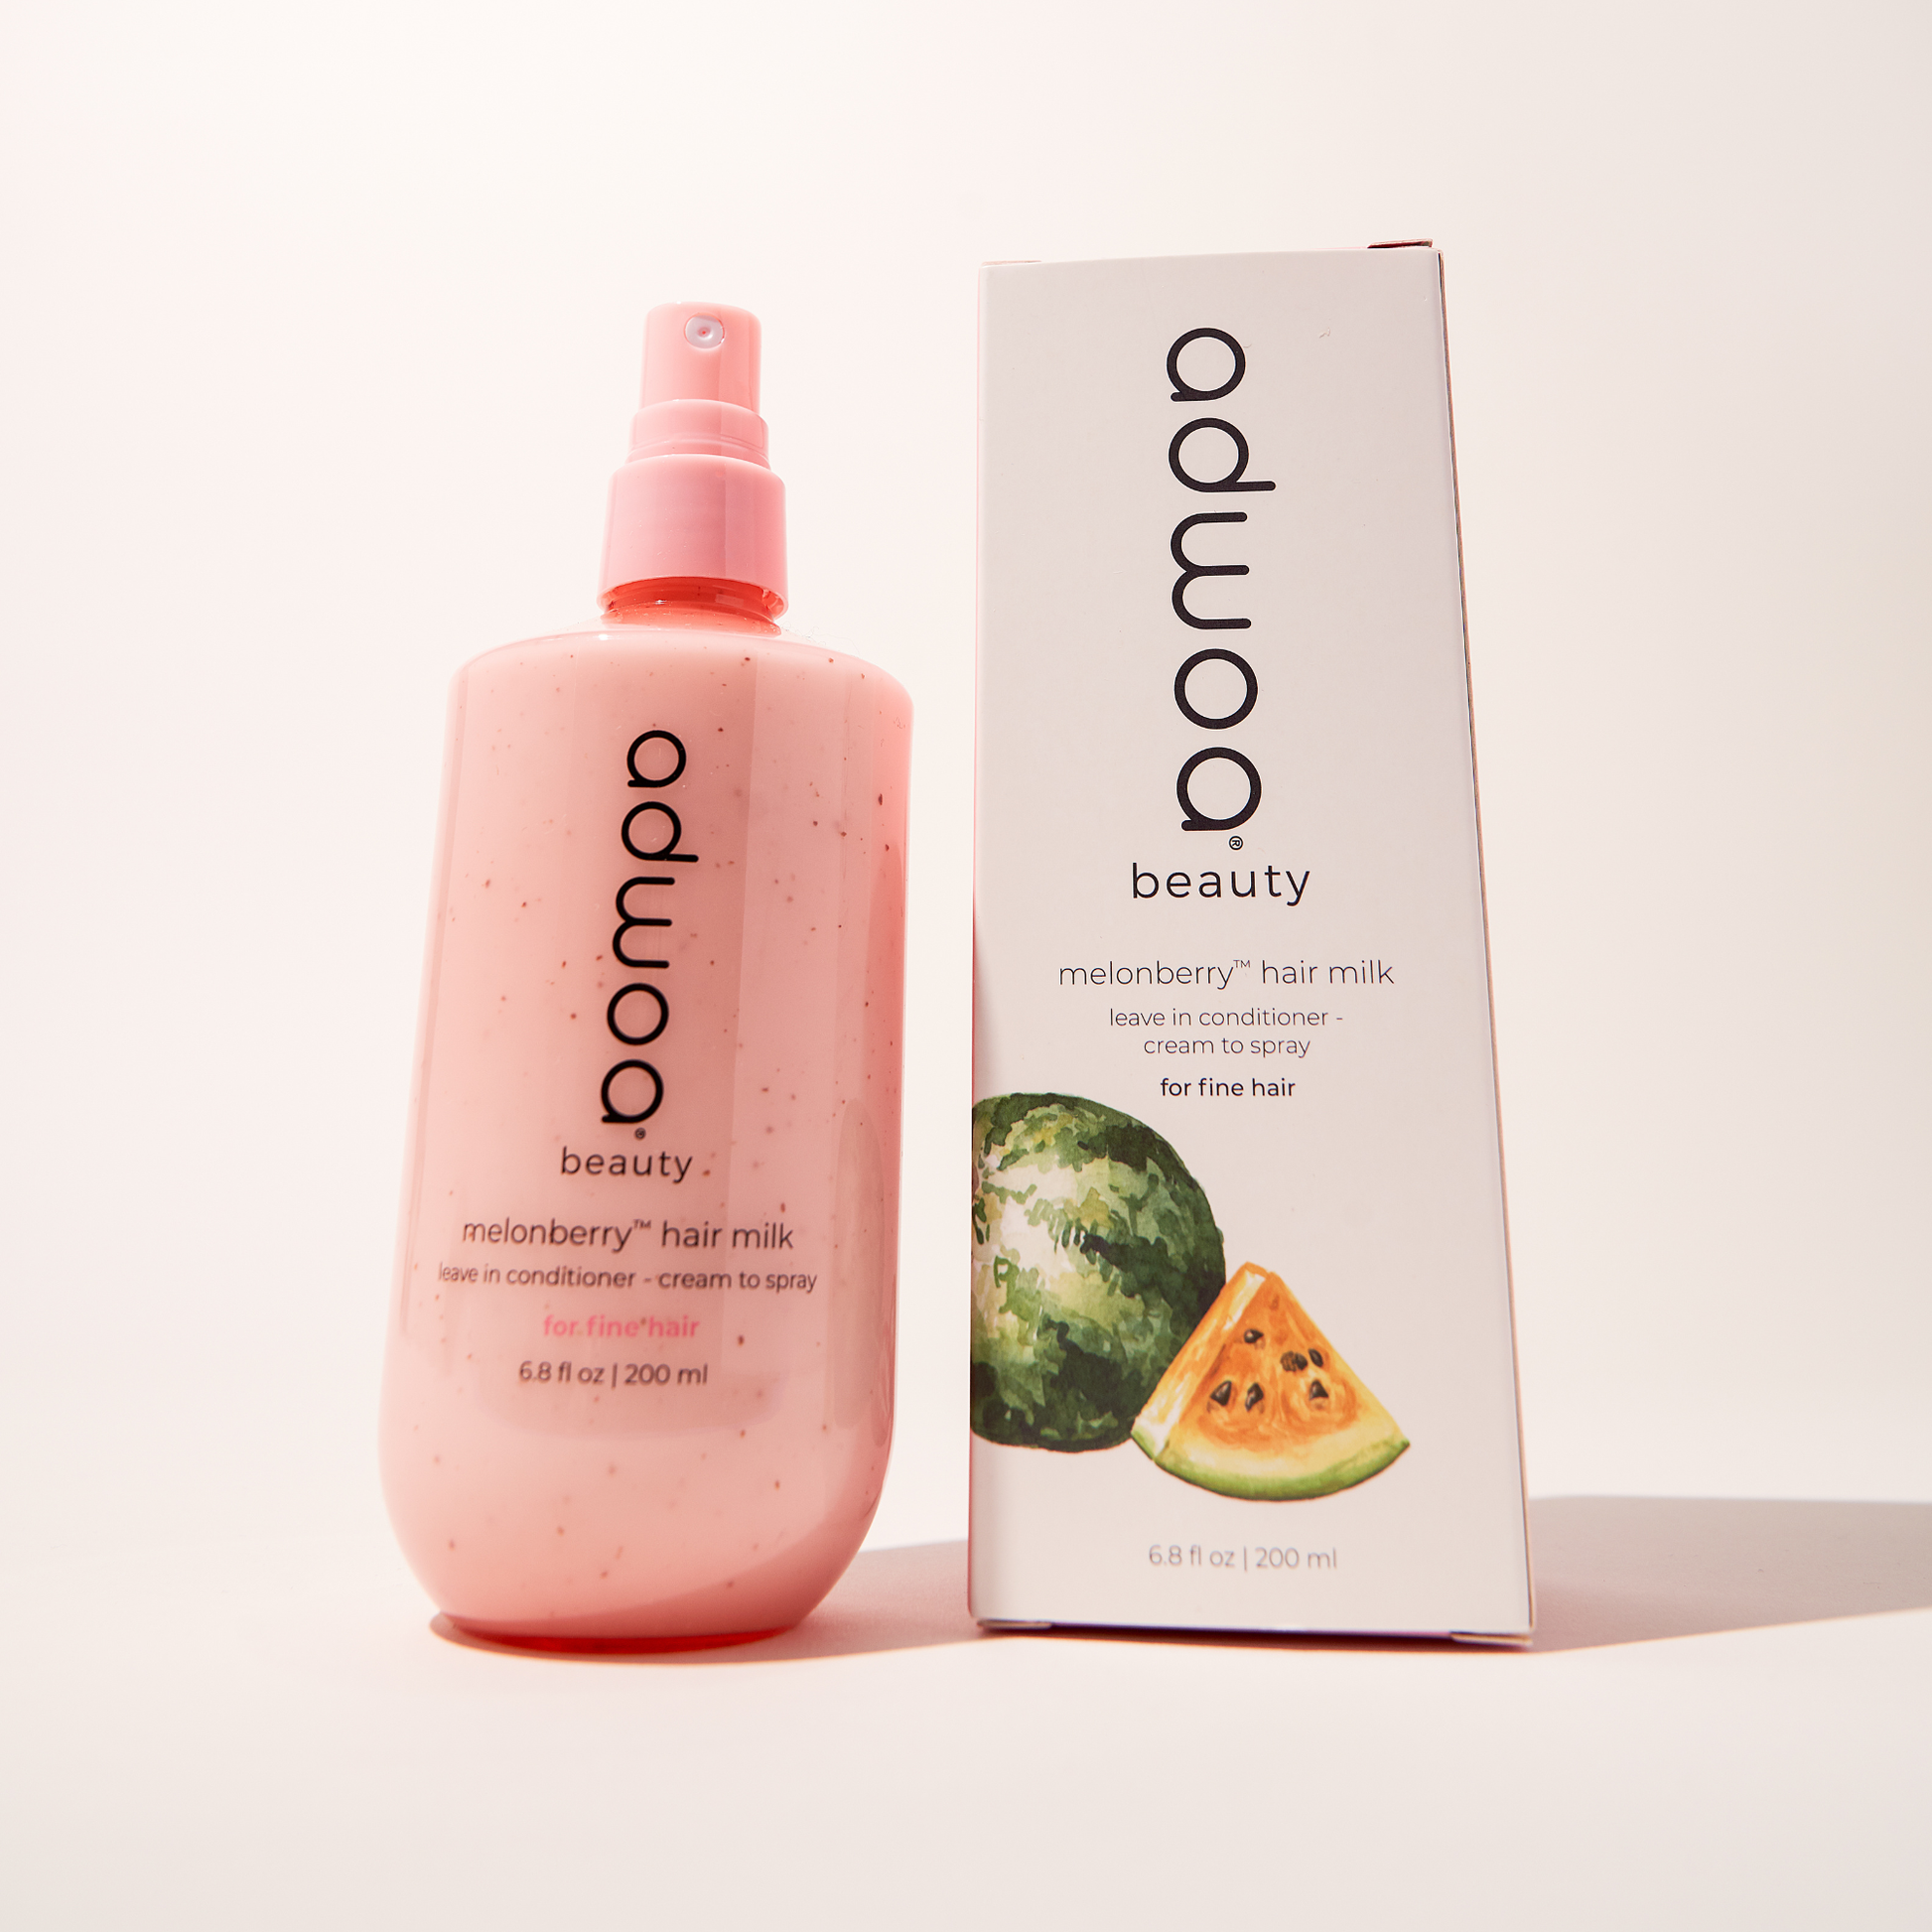    adwoa beauty hair milk leave-in conditioner with melonberry™